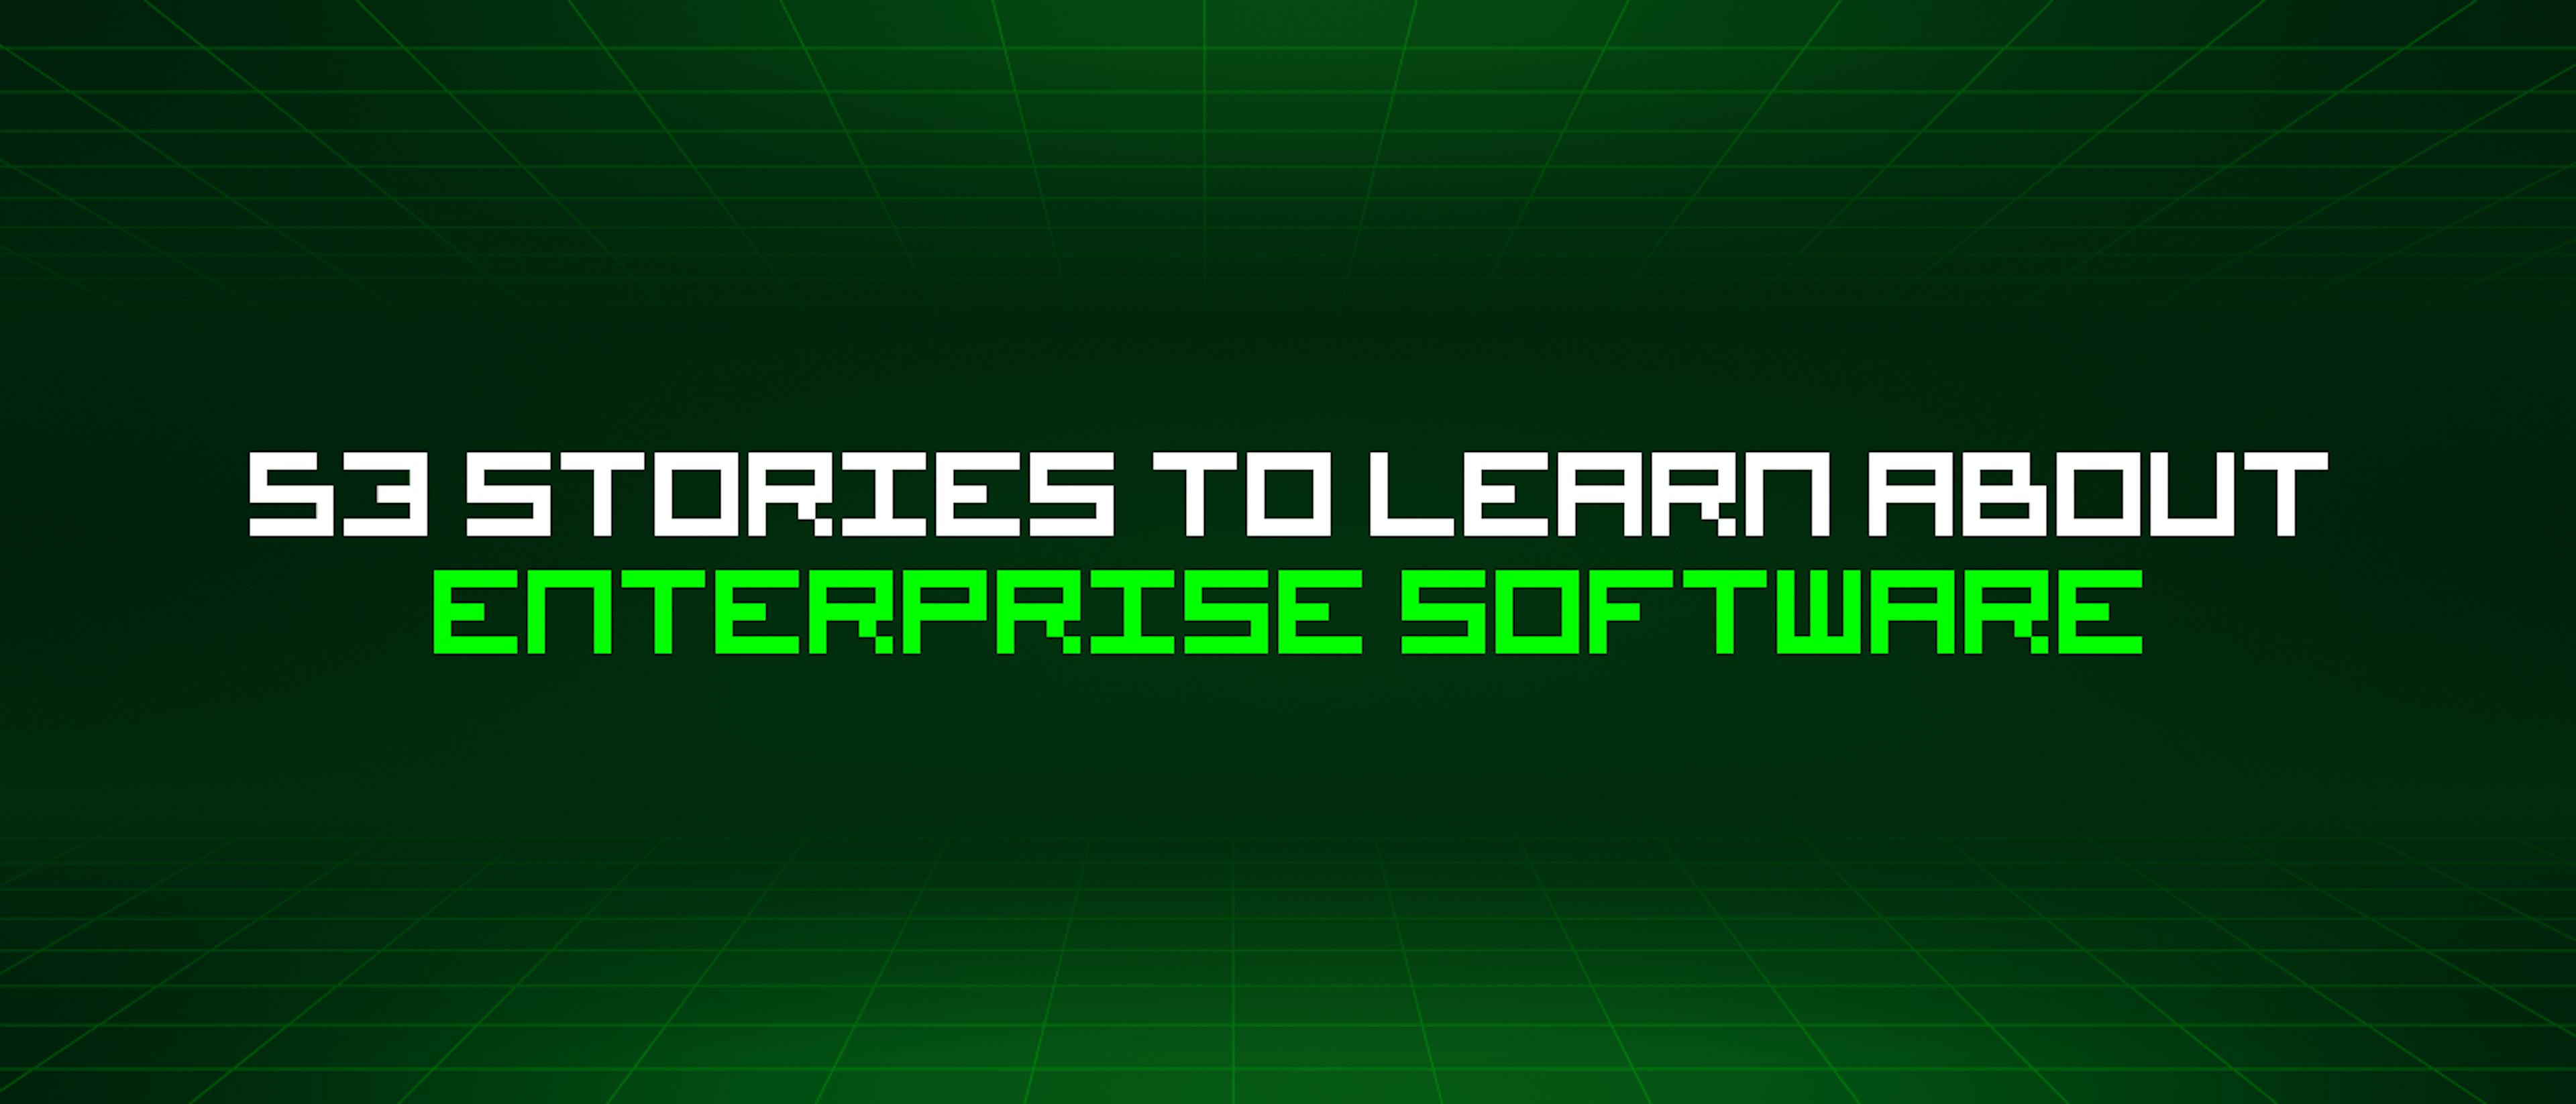 featured image - 53 Stories To Learn About Enterprise Software